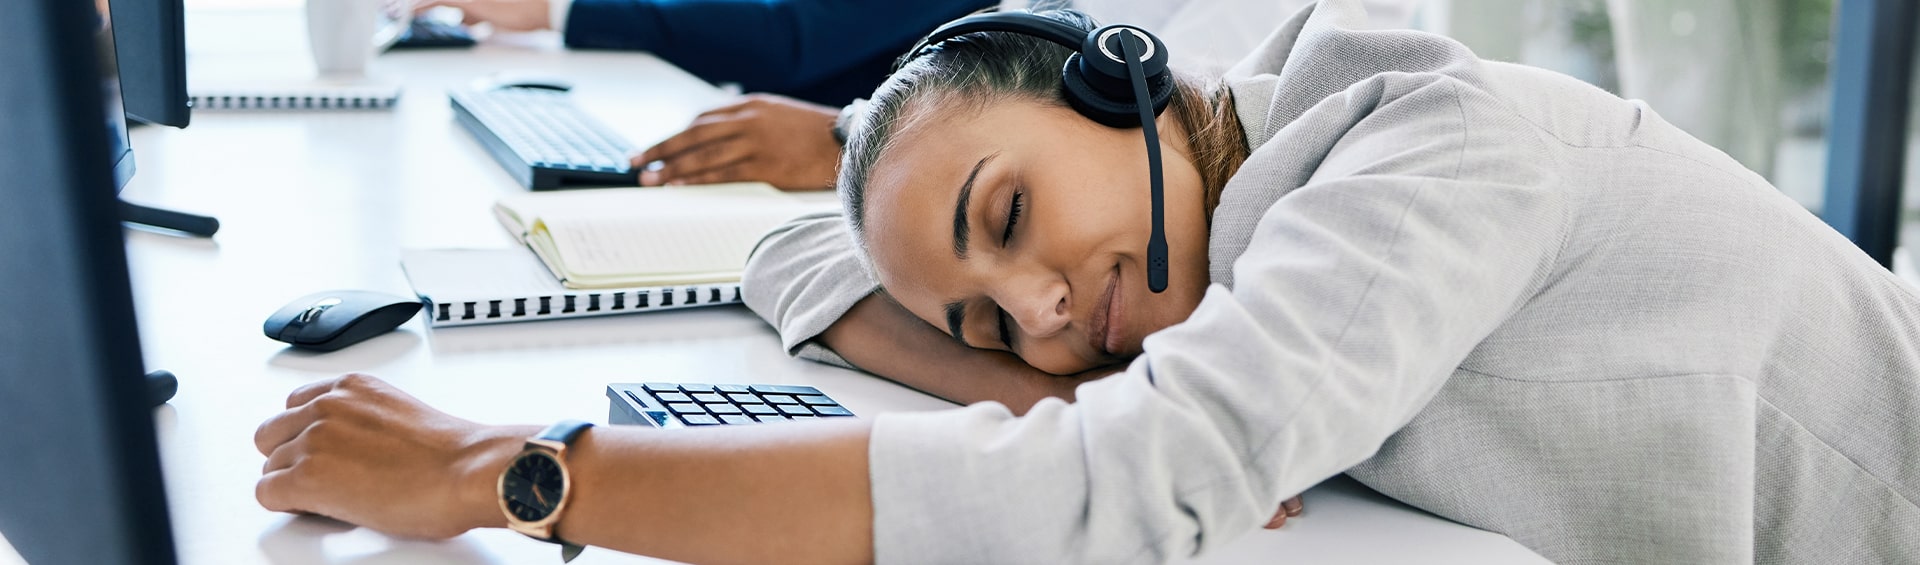 The Secret to Building a Positive Workplace May Include Letting Your Employees Sleep on the Job